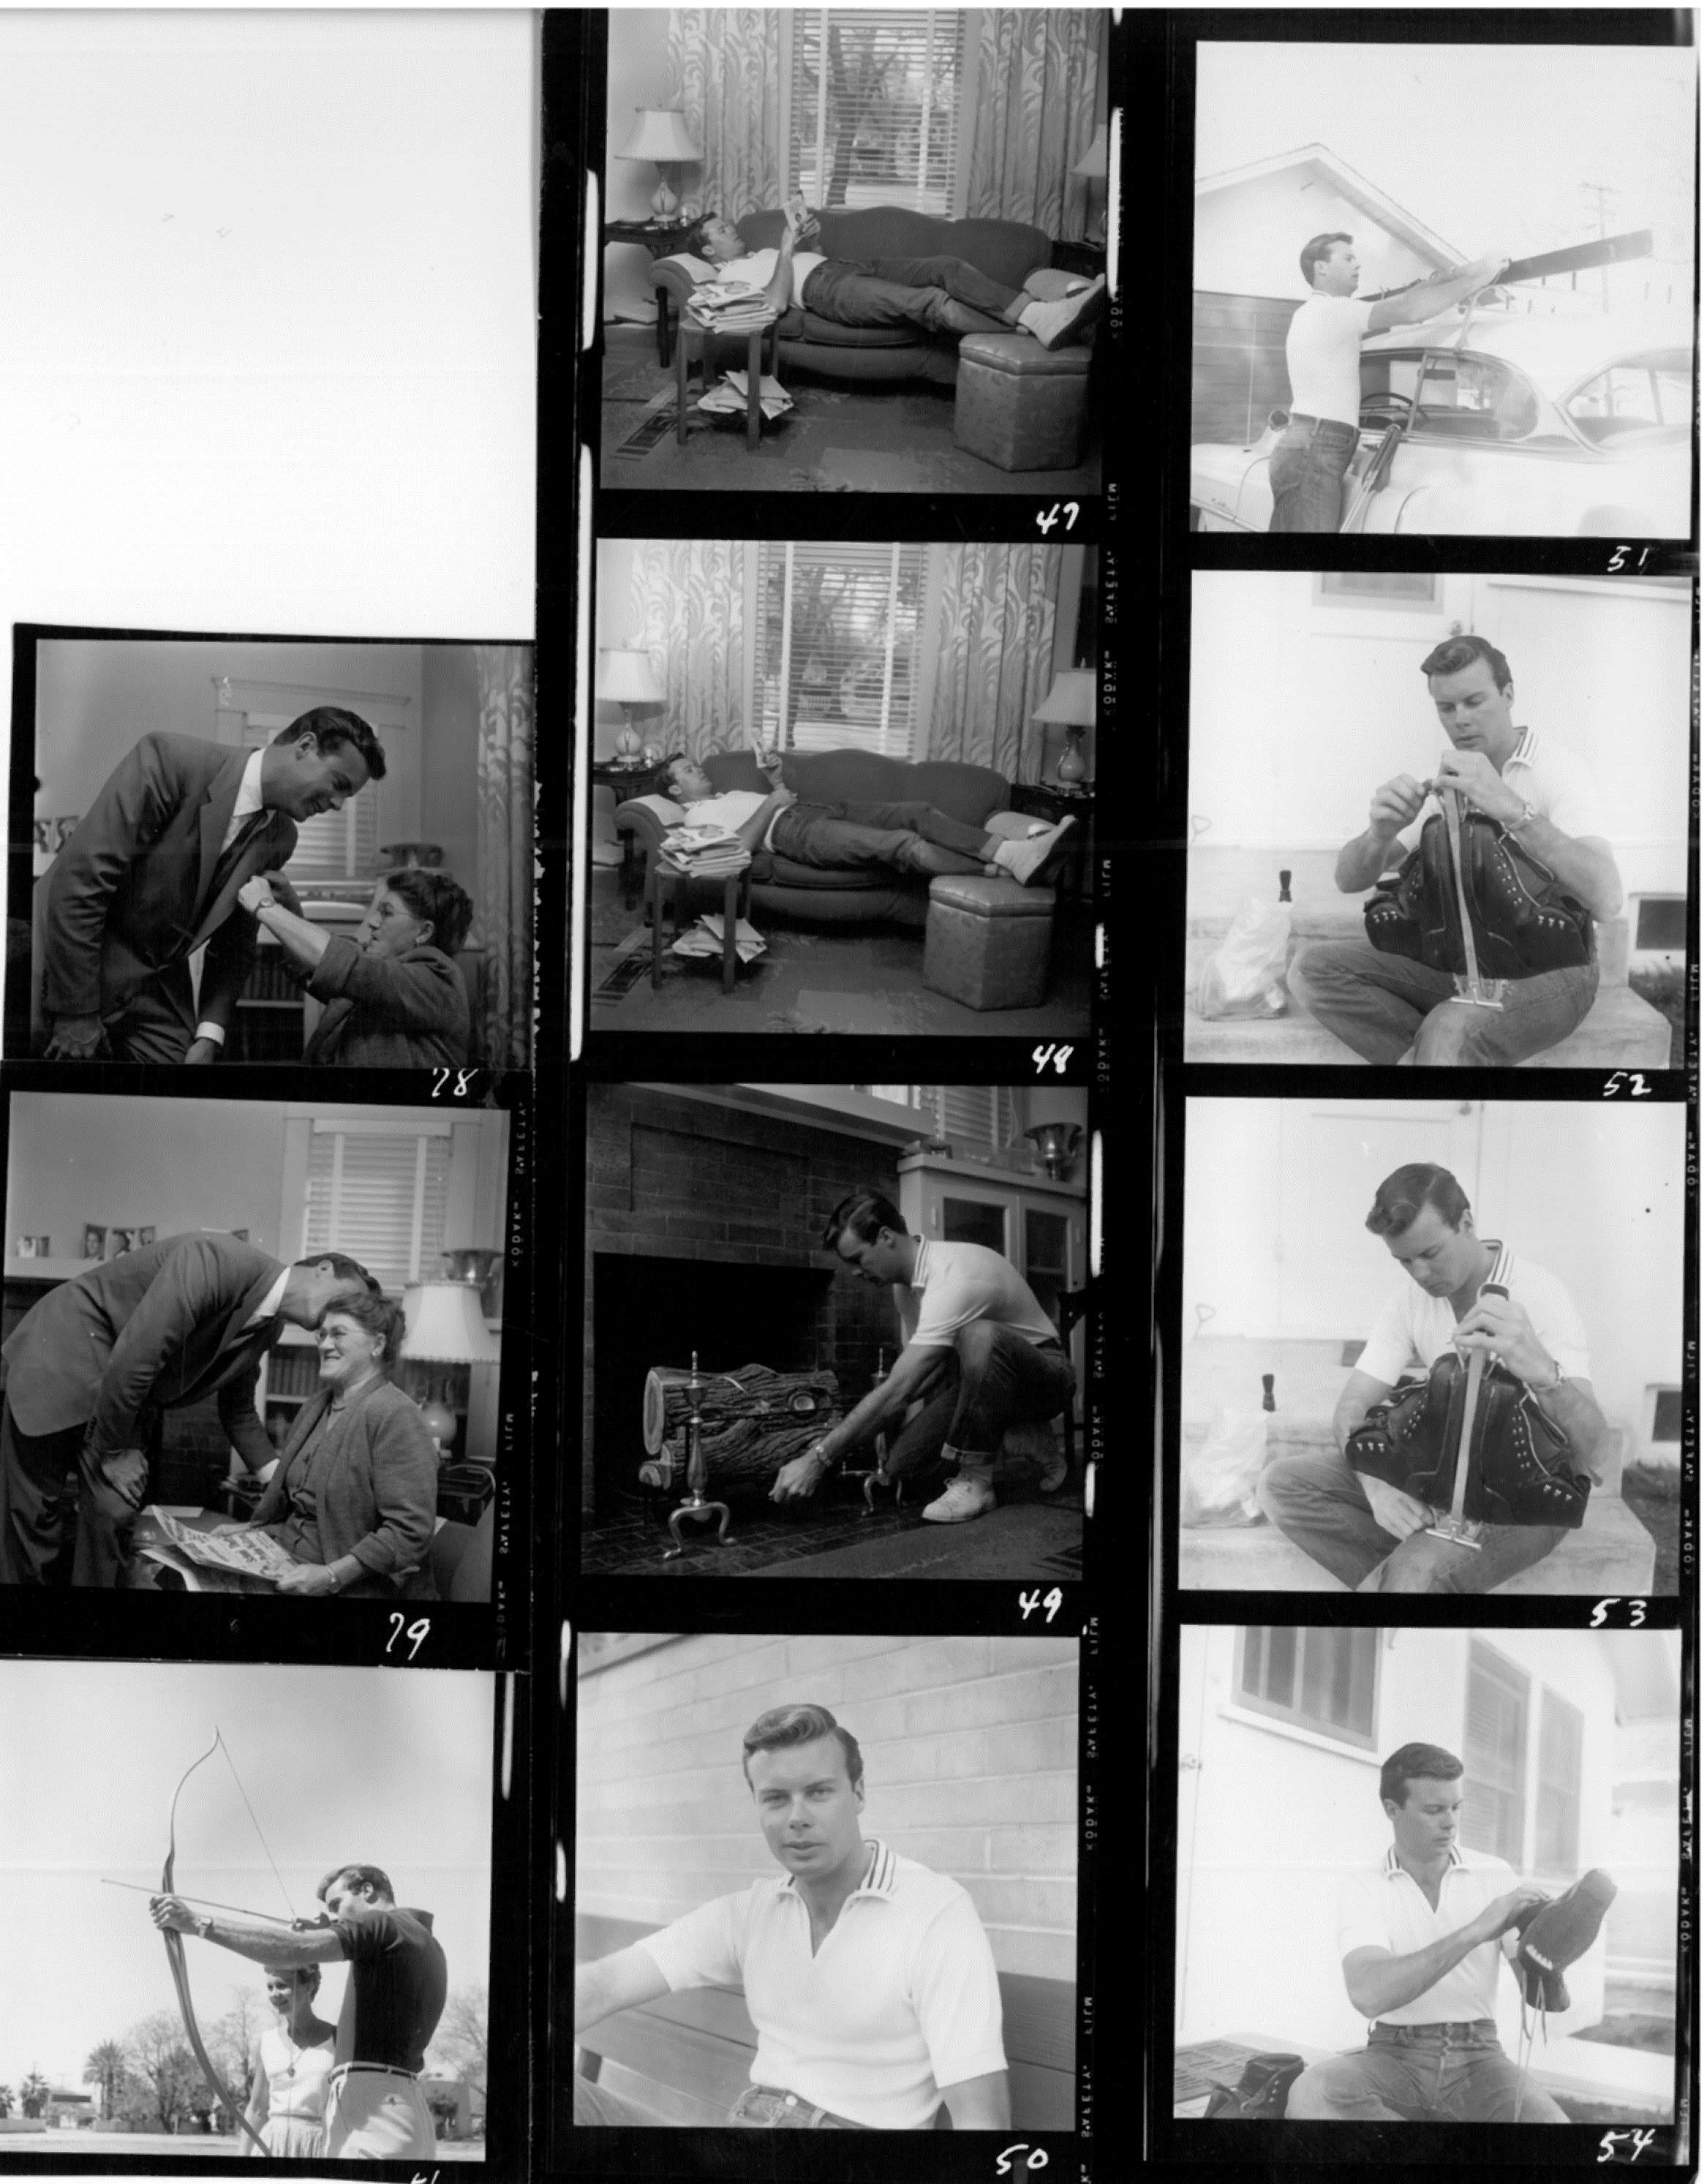  Contact sheet of photos made at 212, c. Jan. 1955.  Photos: Larry Barberi for Globe Photos, New York City. “Weekend with the Folks”/”A Day to Loaf,”  Screenplay , July 1955.  Woman in photos of Bob with bow and arrow unknown. 